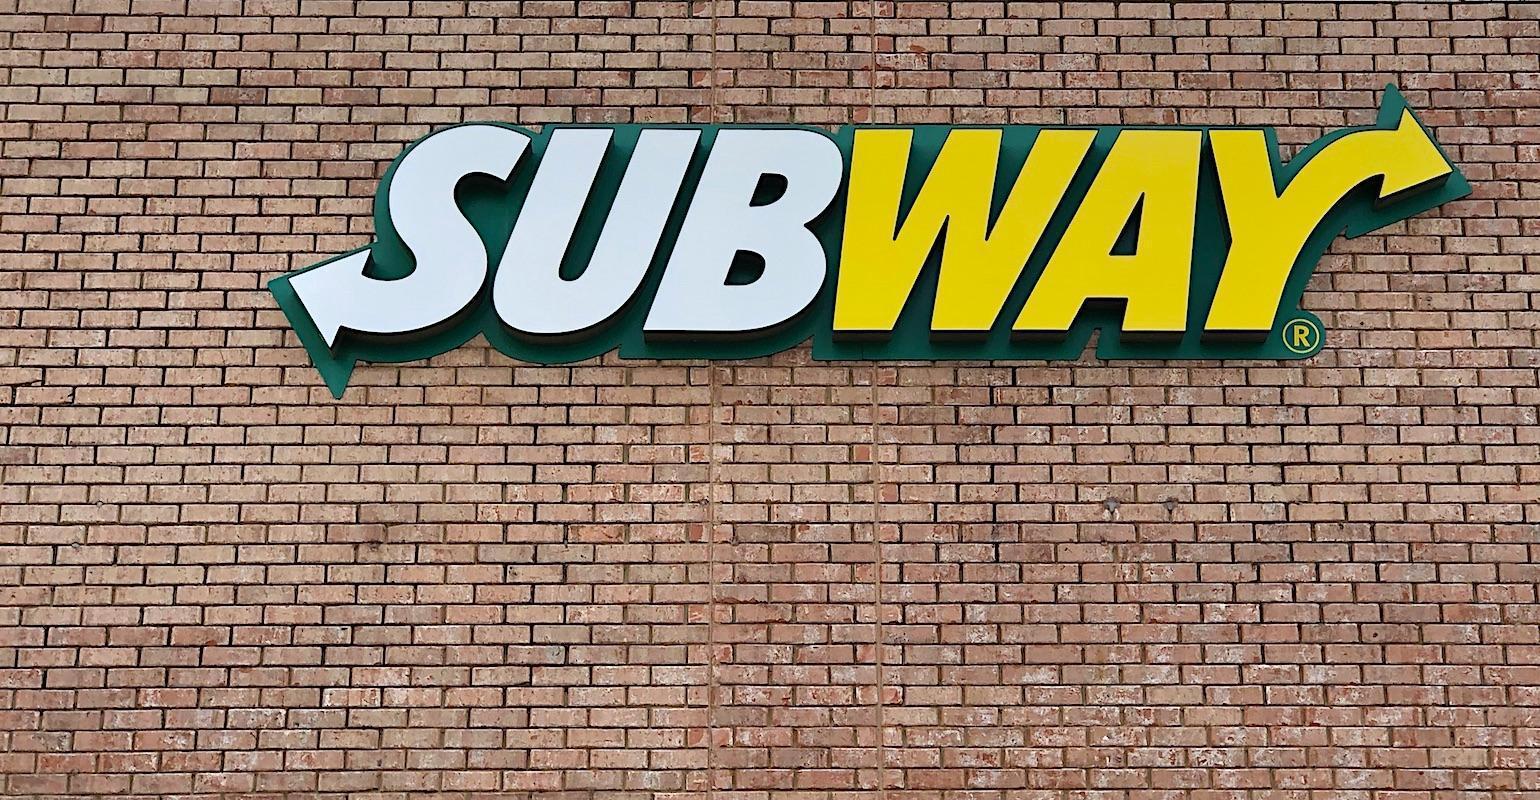 Subway may lower sale price to 'upwards of $7B,' report says